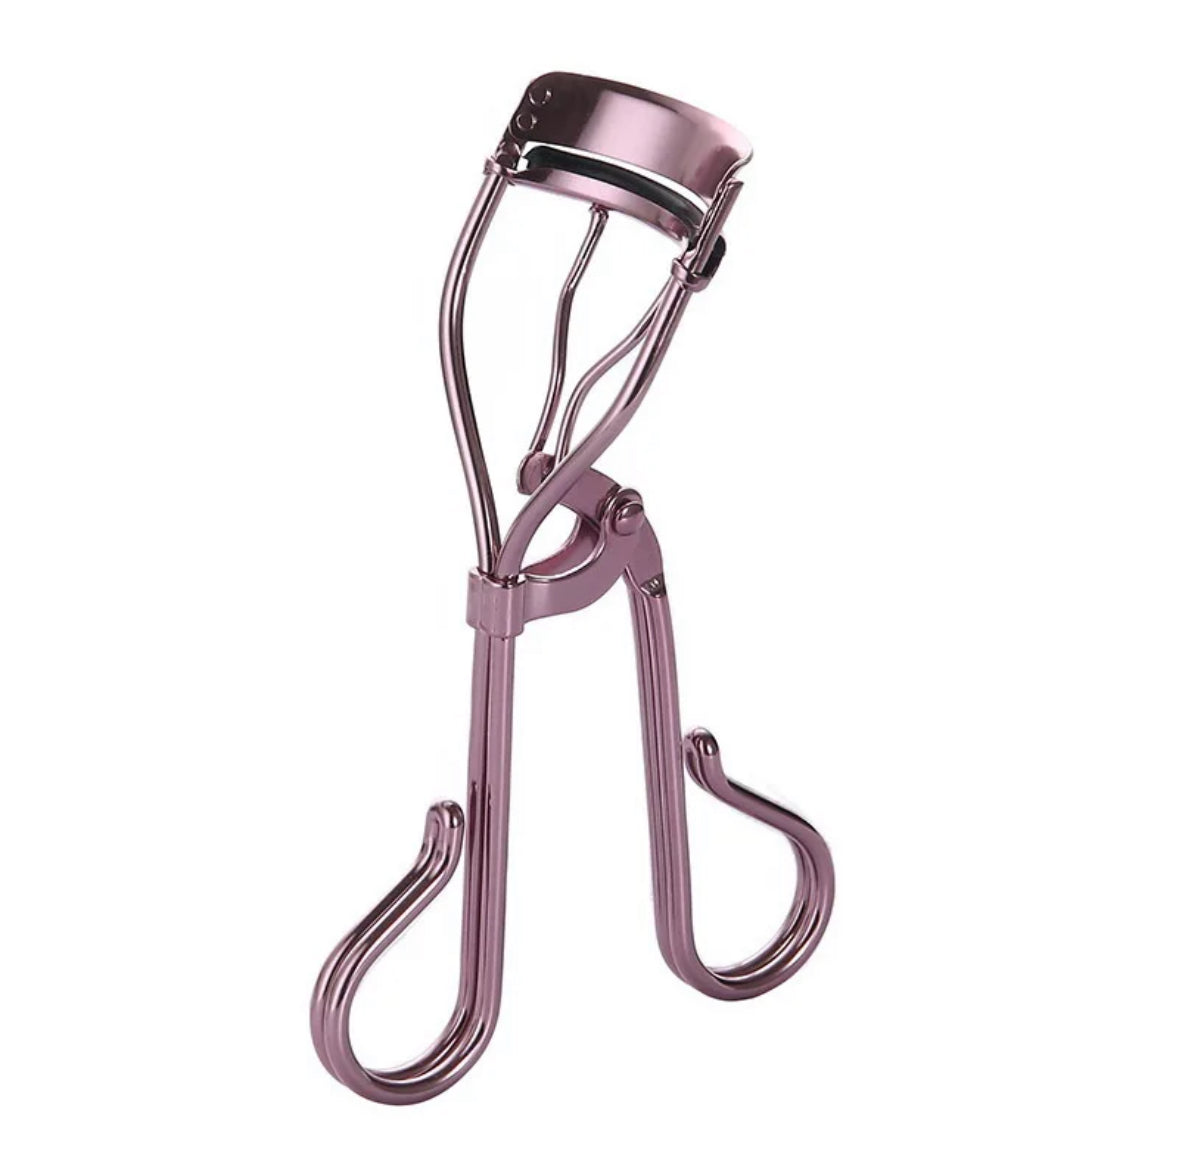 Stainless Steel Eyelash Curler with Silicone Pad